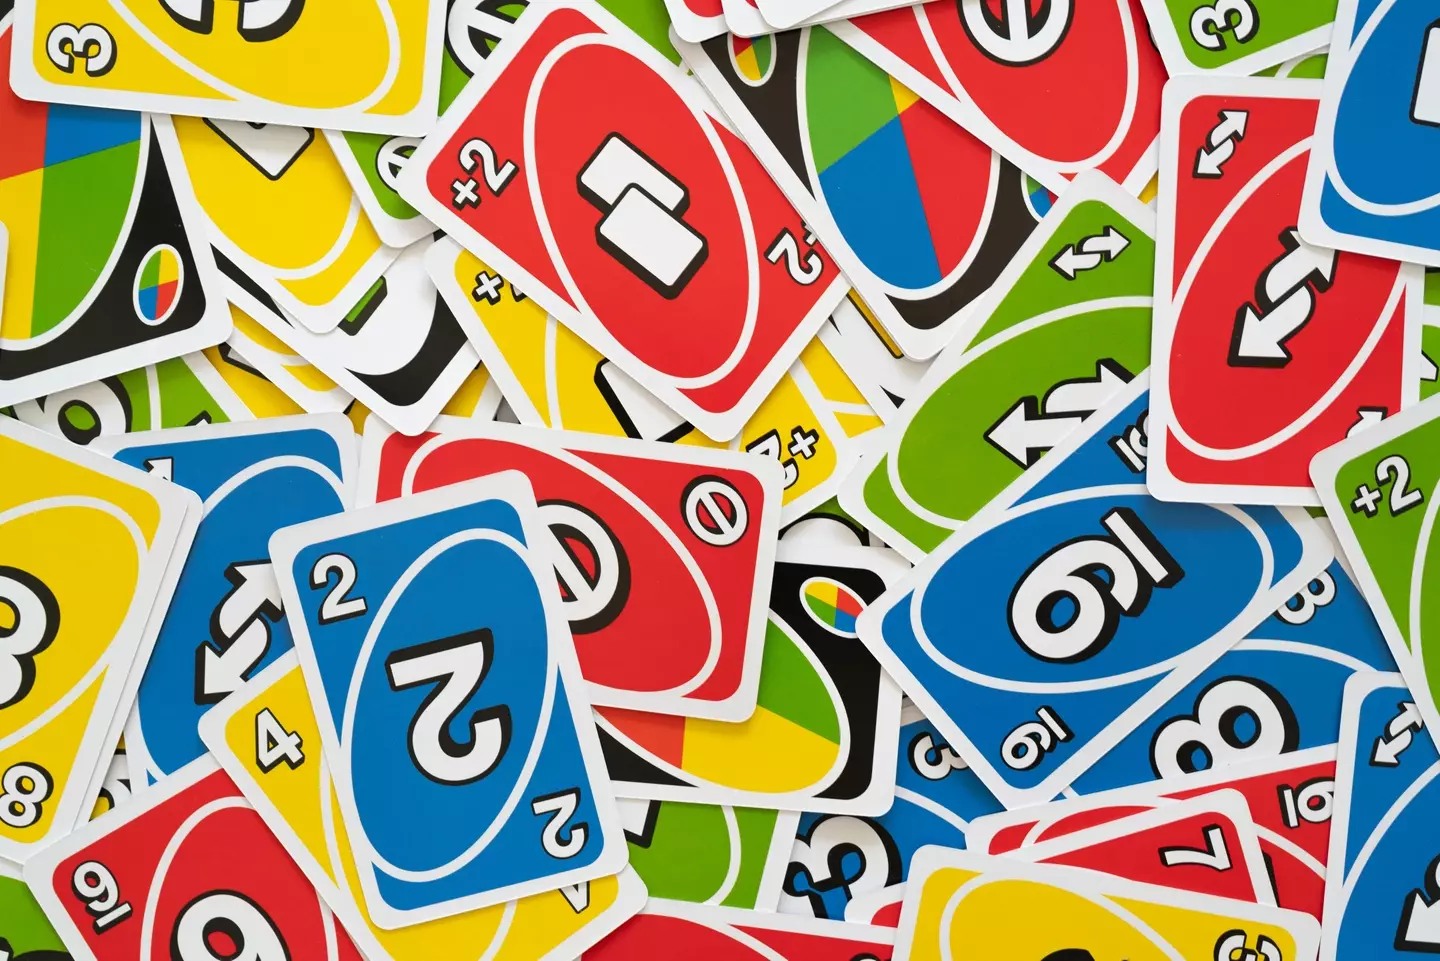 Remember, no stacking UNO cards. It's the rules.